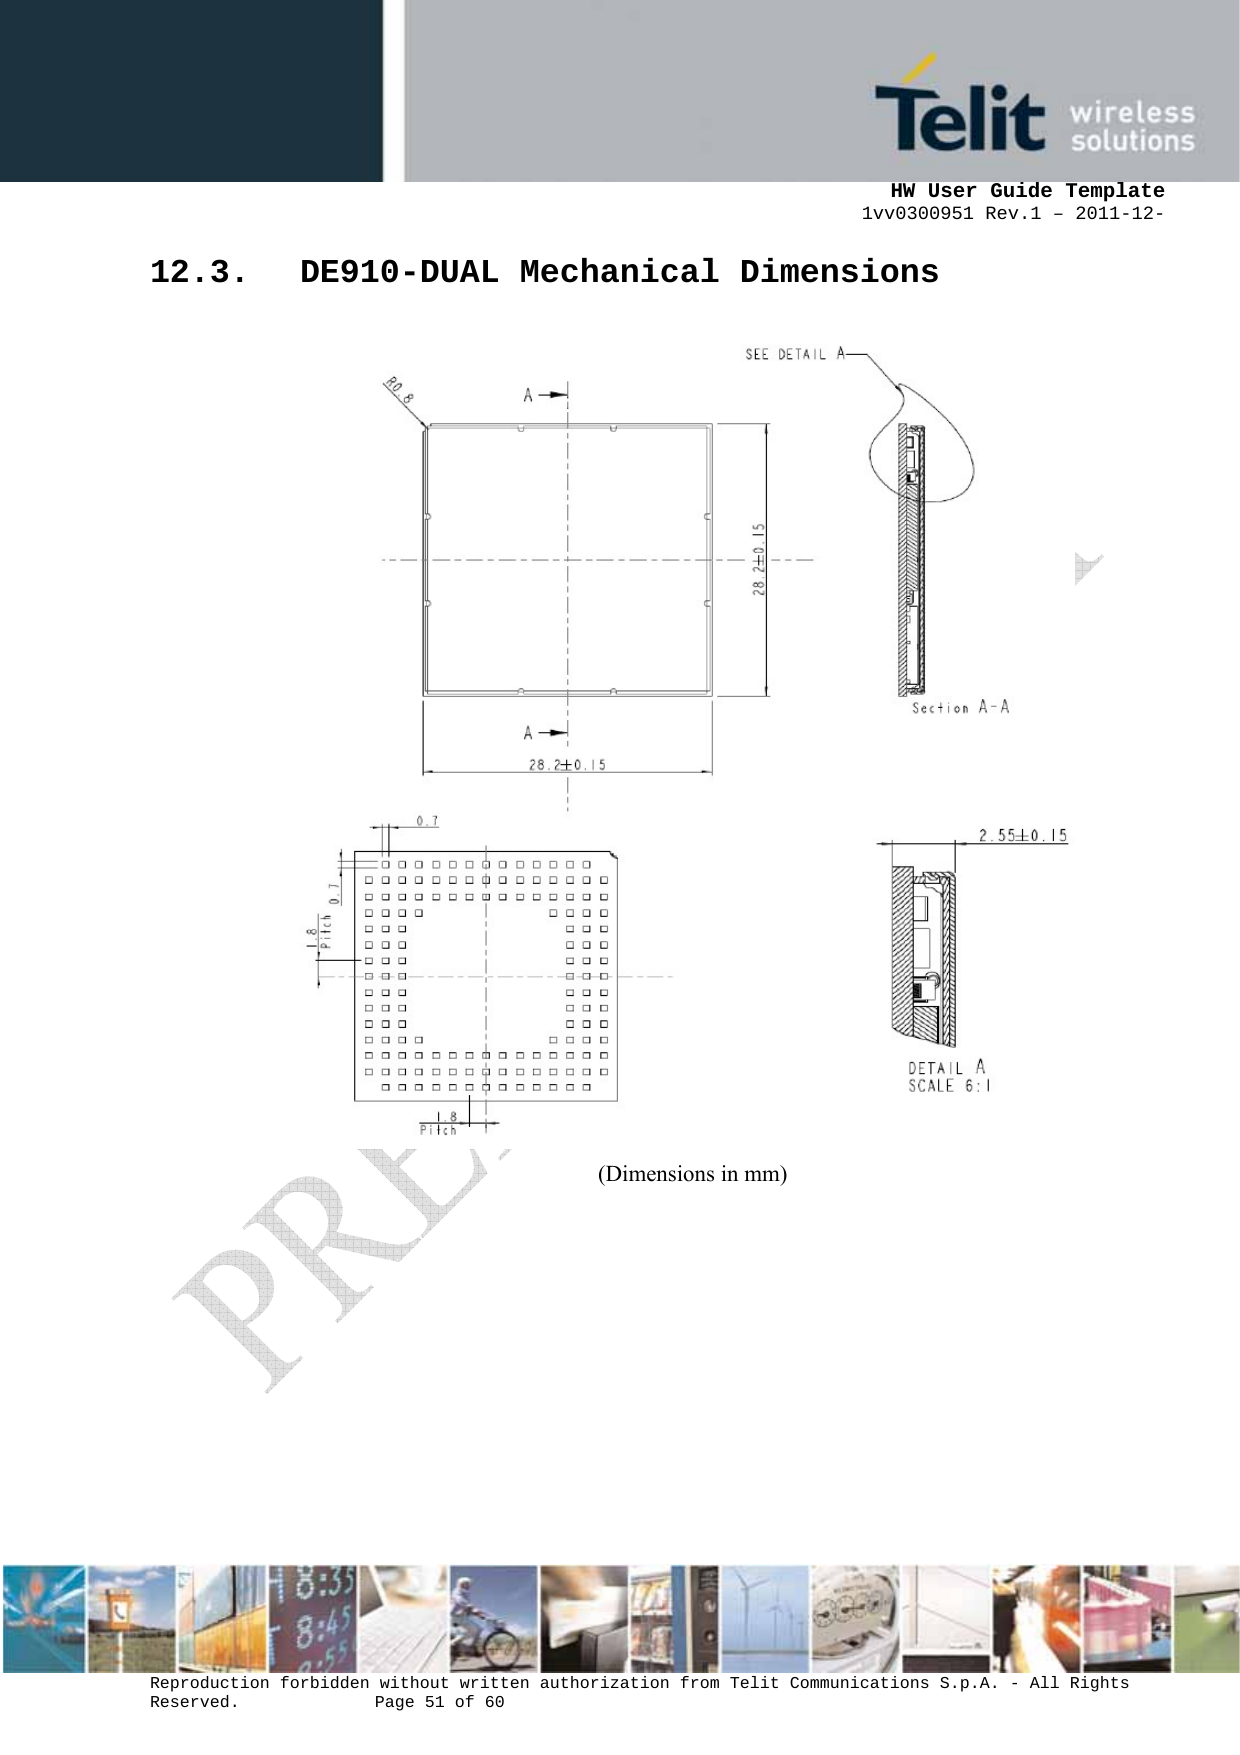      HW User Guide Template 1vv0300951 Rev.1 – 2011-12-  Reproduction forbidden without written authorization from Telit Communications S.p.A. - All Rights Reserved.    Page 51 of 60                                                     12.3. DE910-DUAL Mechanical Dimensions   (Dimensions in mm) 